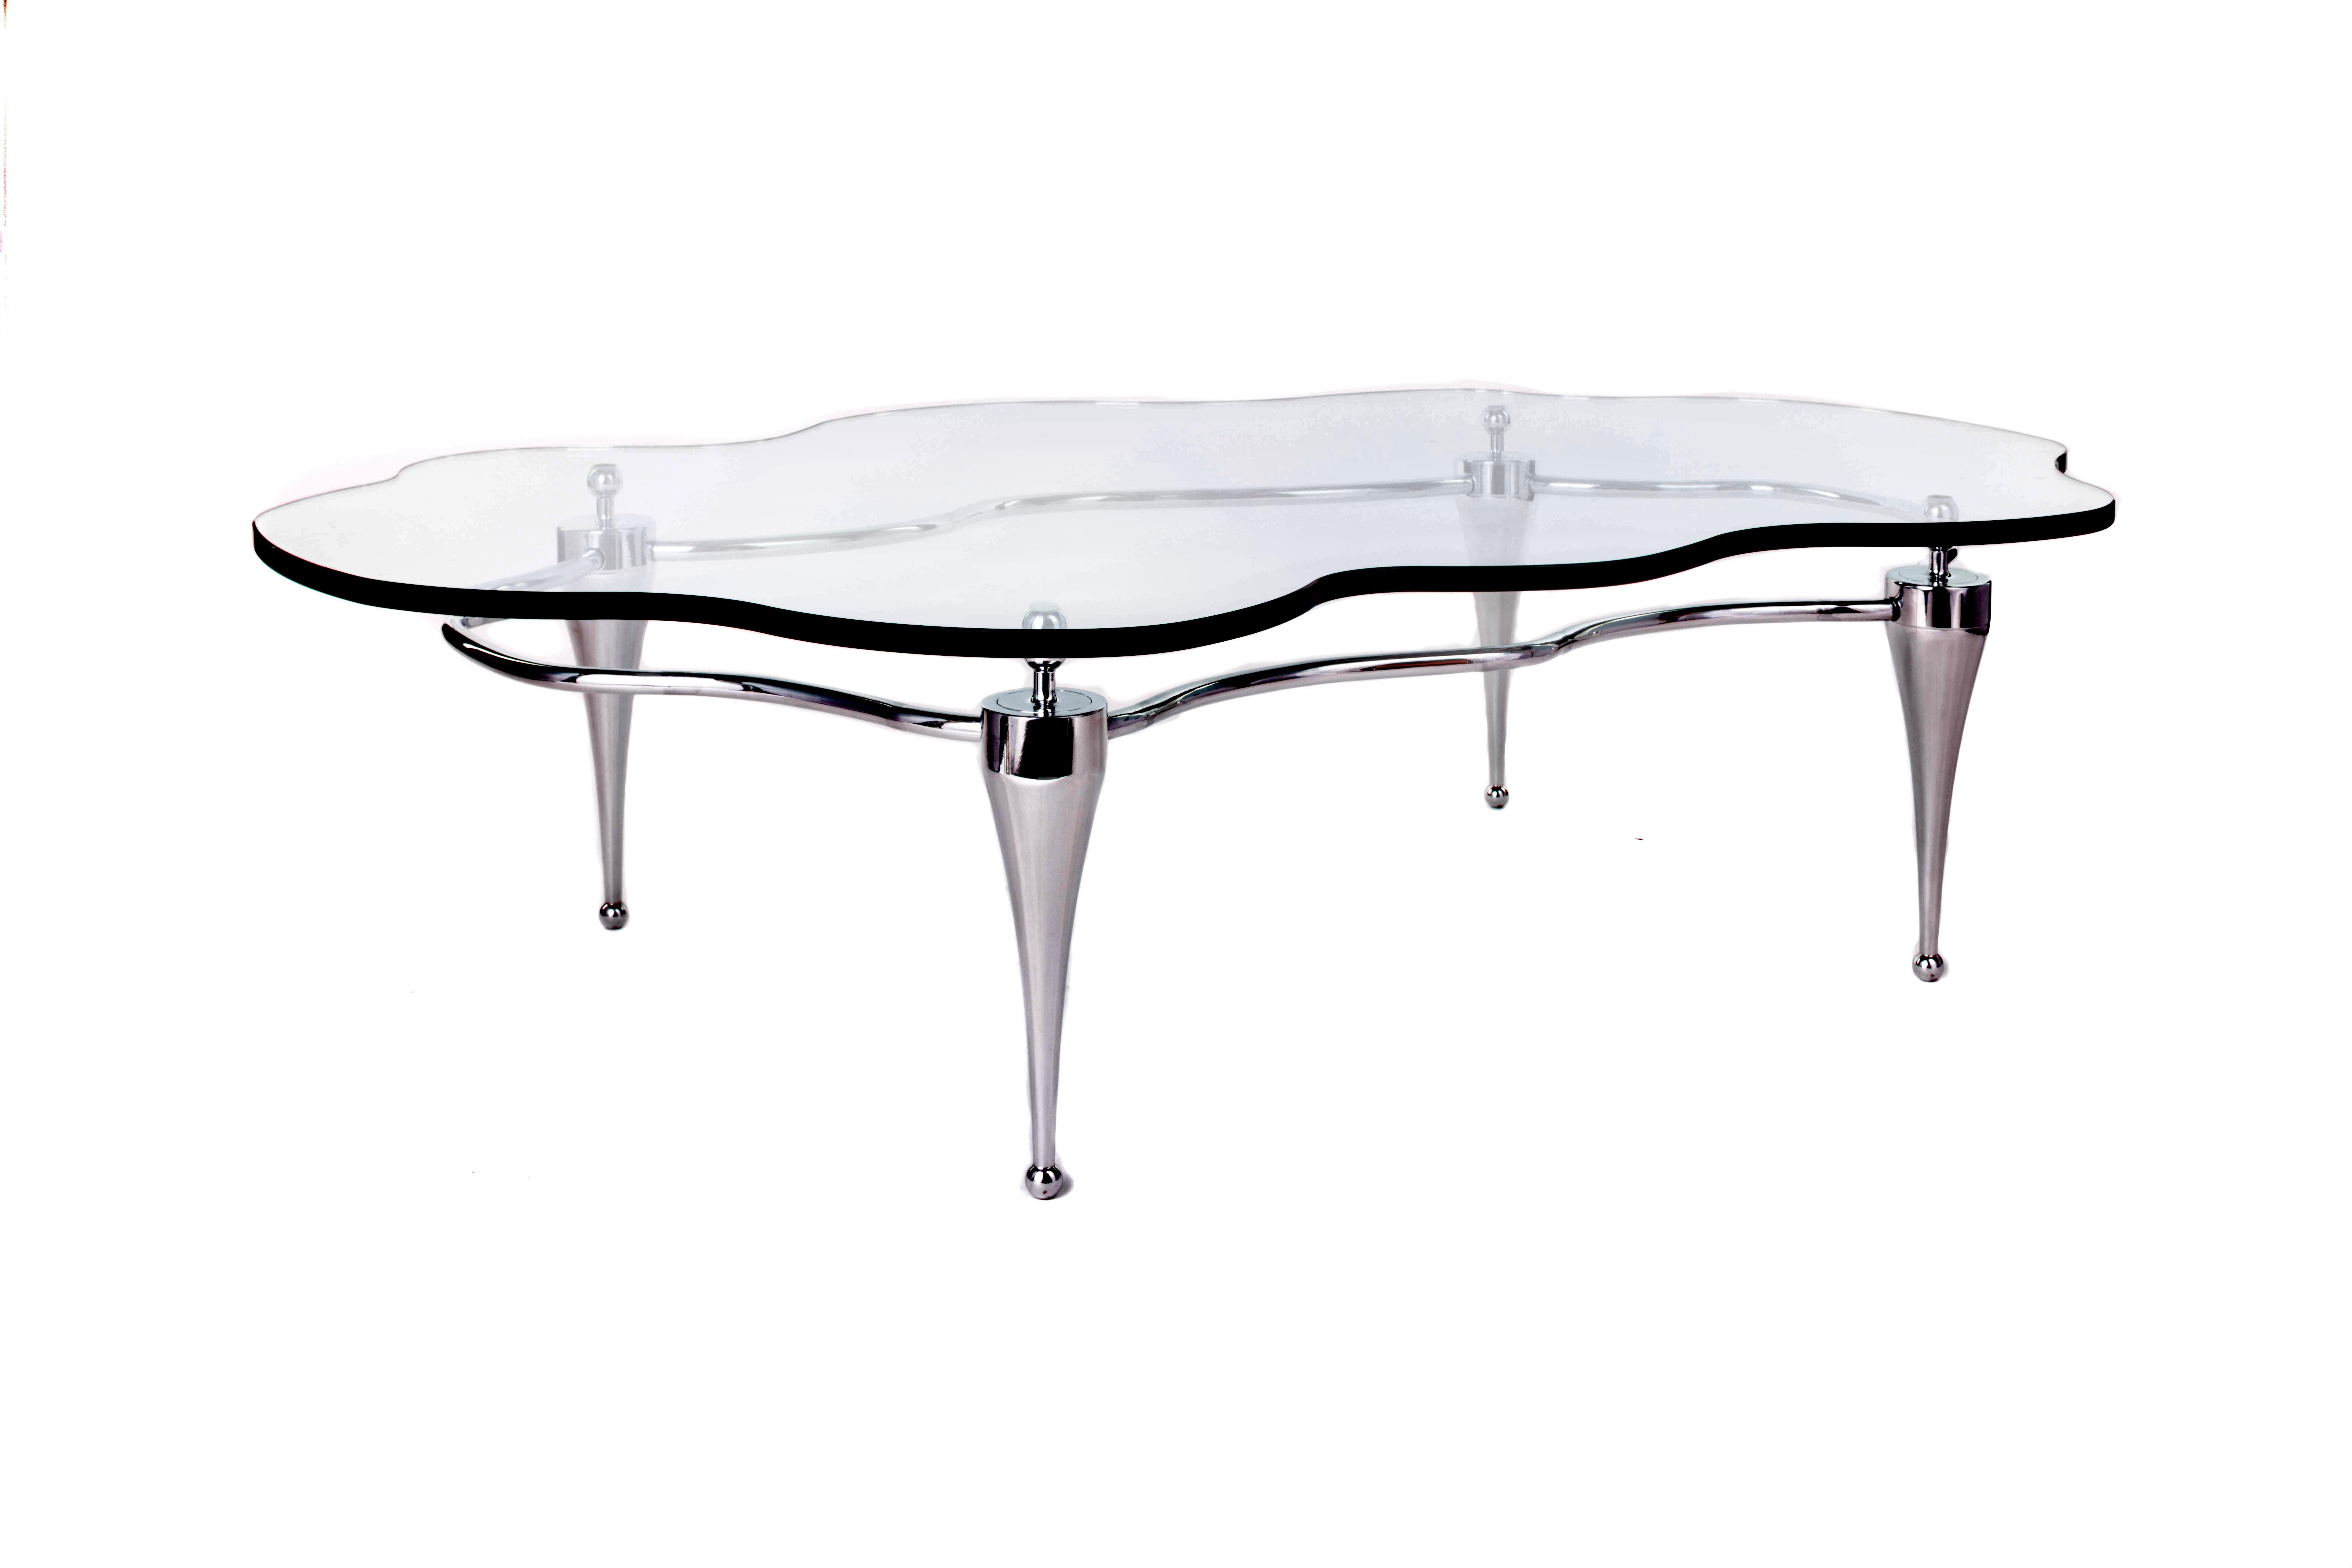 Art Deco Coffee Table With Glass Top And Polished Aluminum Base For Sale